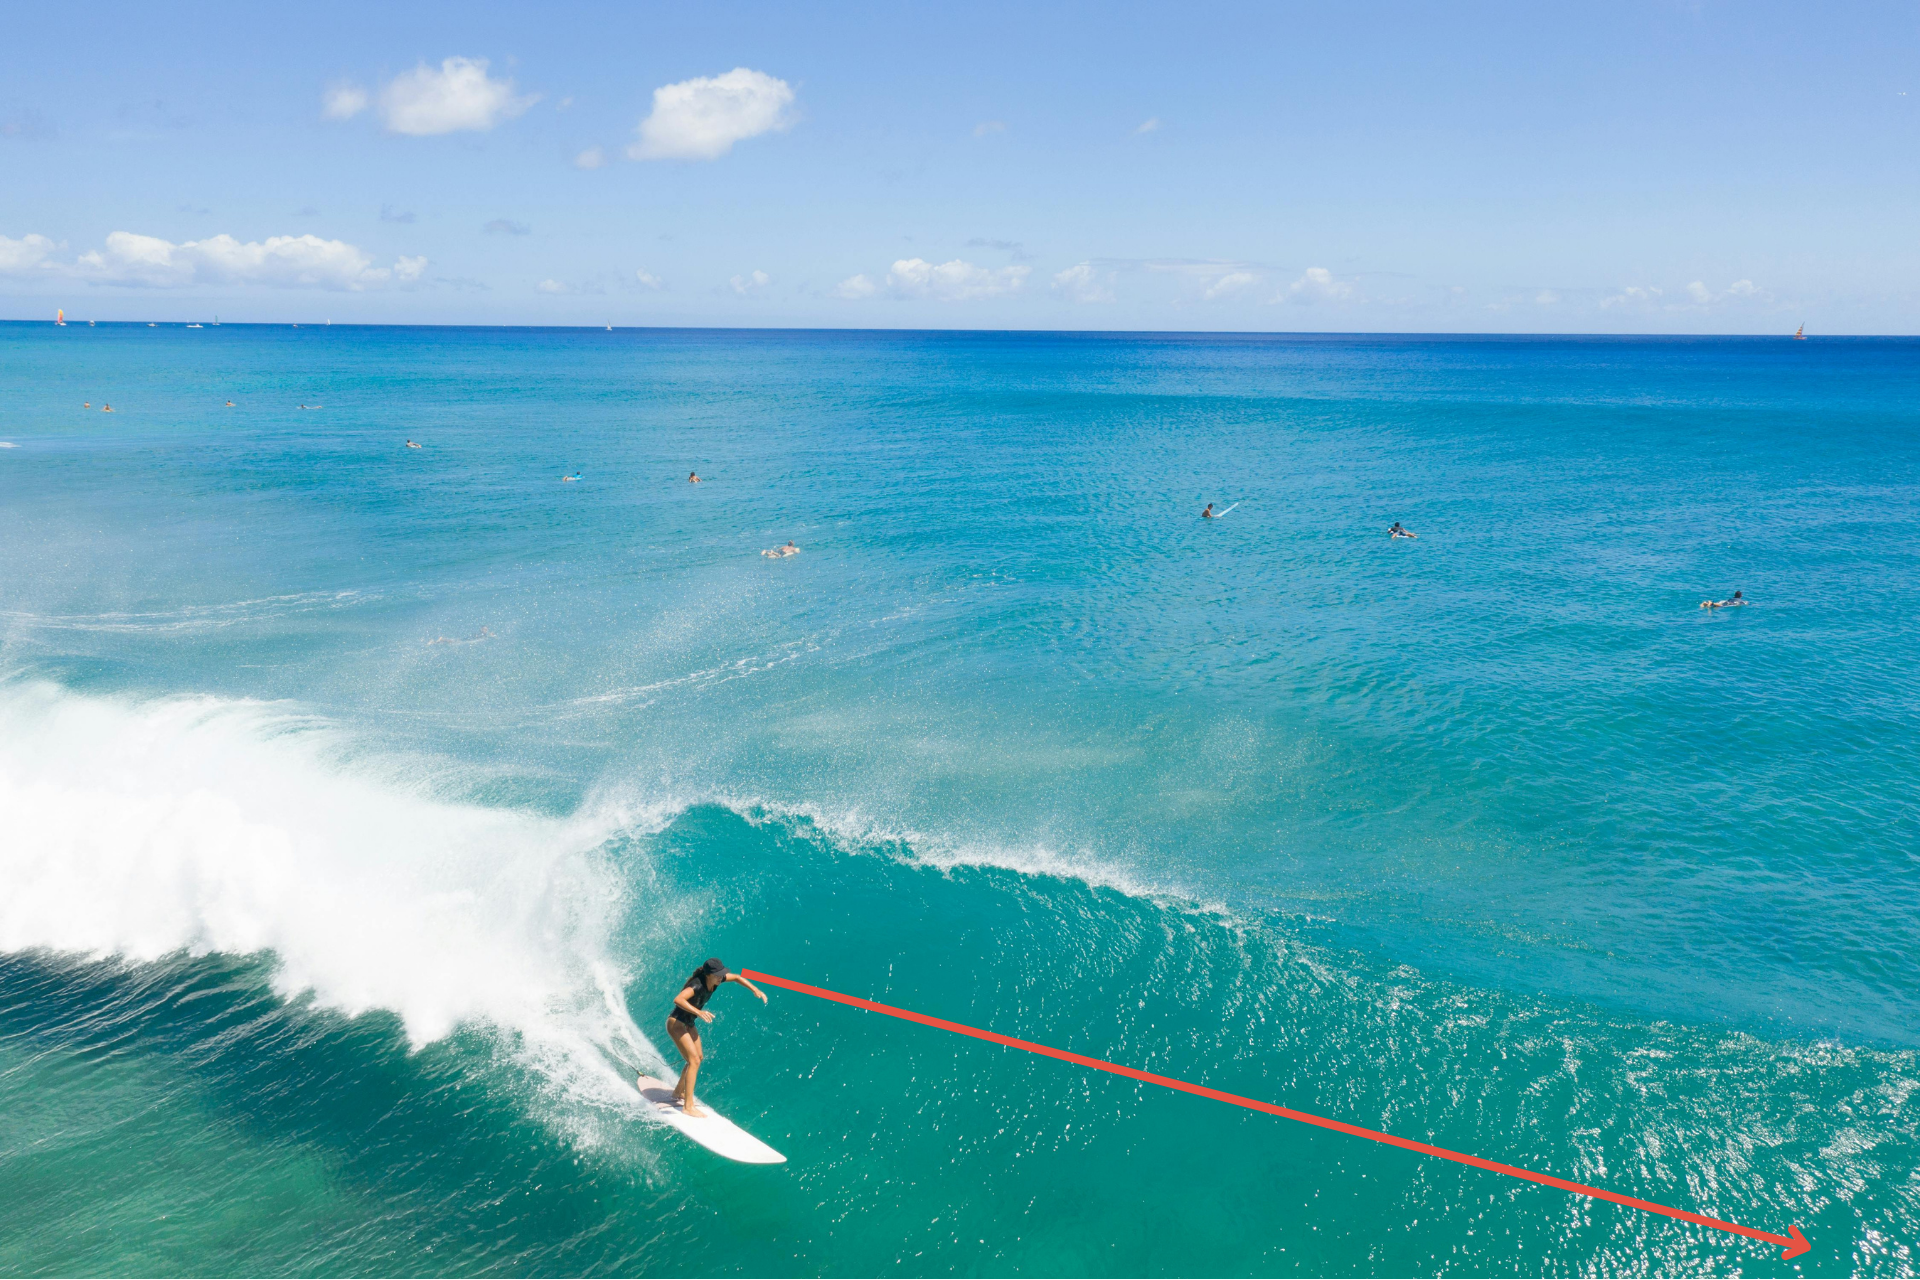 Visualize a line extending down the face of the wave that represents your desired trajectory, aiming to ride above it